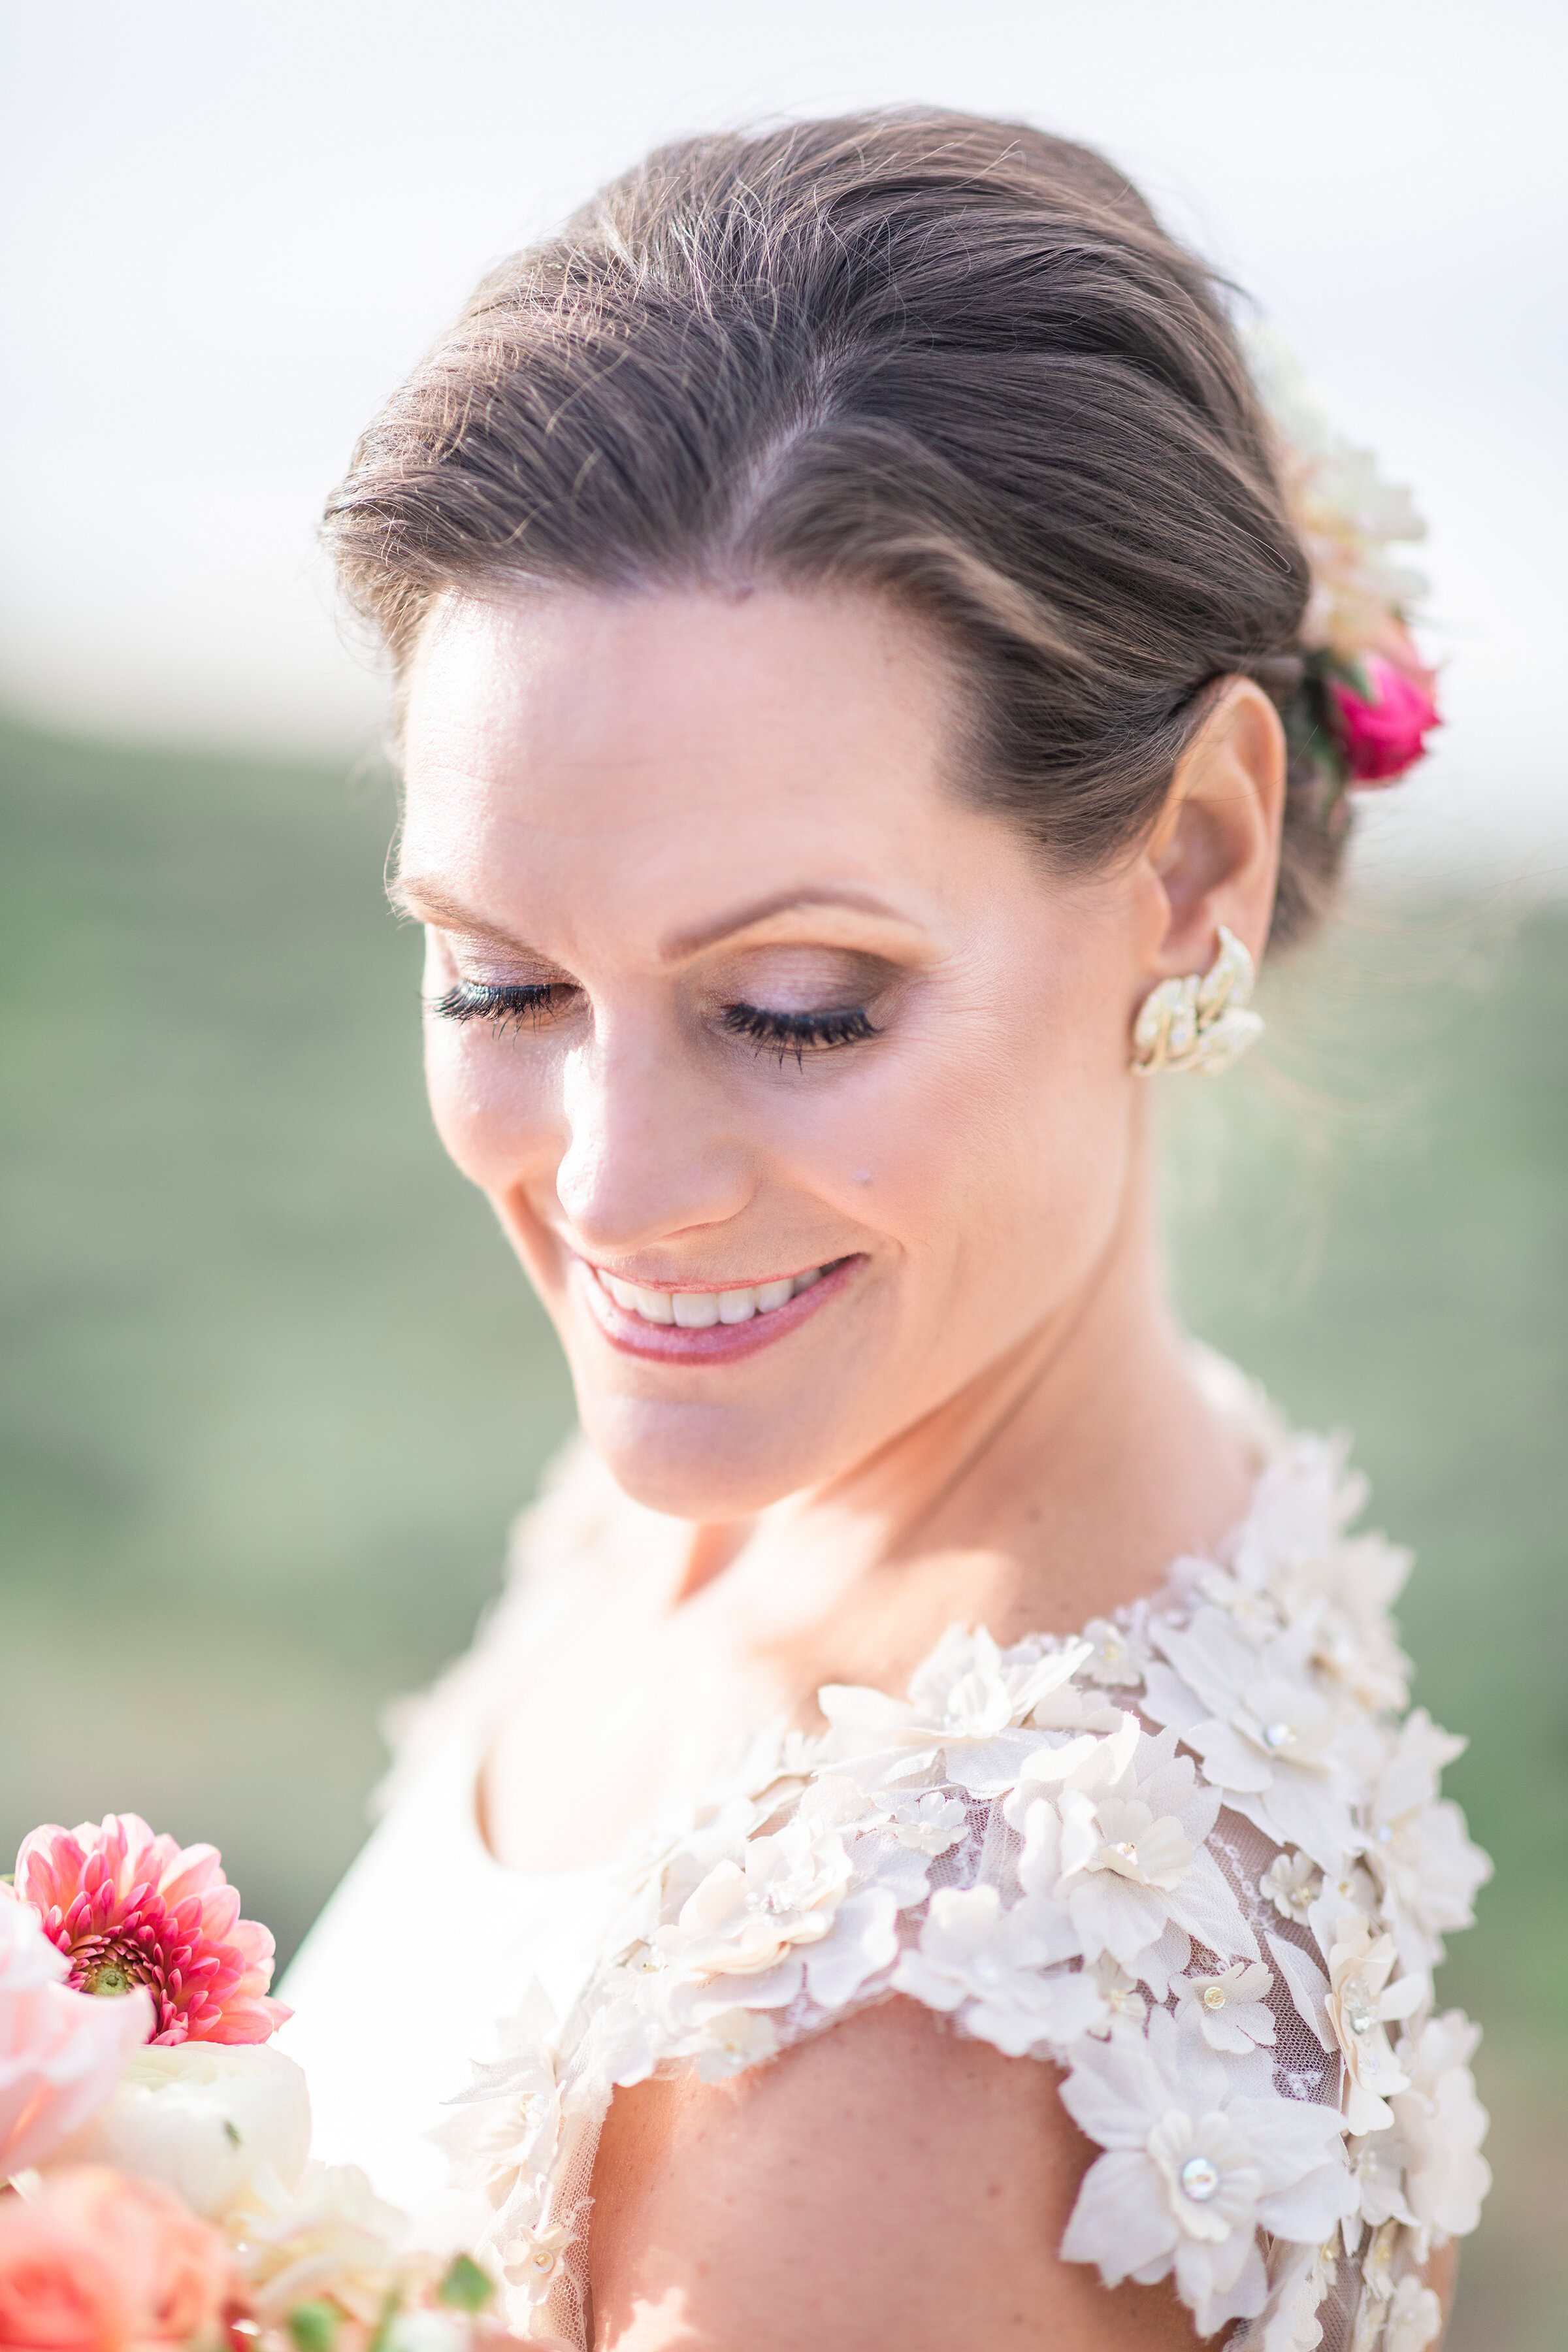  focused bridal photography by clarity lane photography featuring feminine bridal accessories and utah mountains, in salt lake city. floral accented wedding dress sleeves laced wedding sleeves and back floral bridal updo petal pink bridal wedding bou